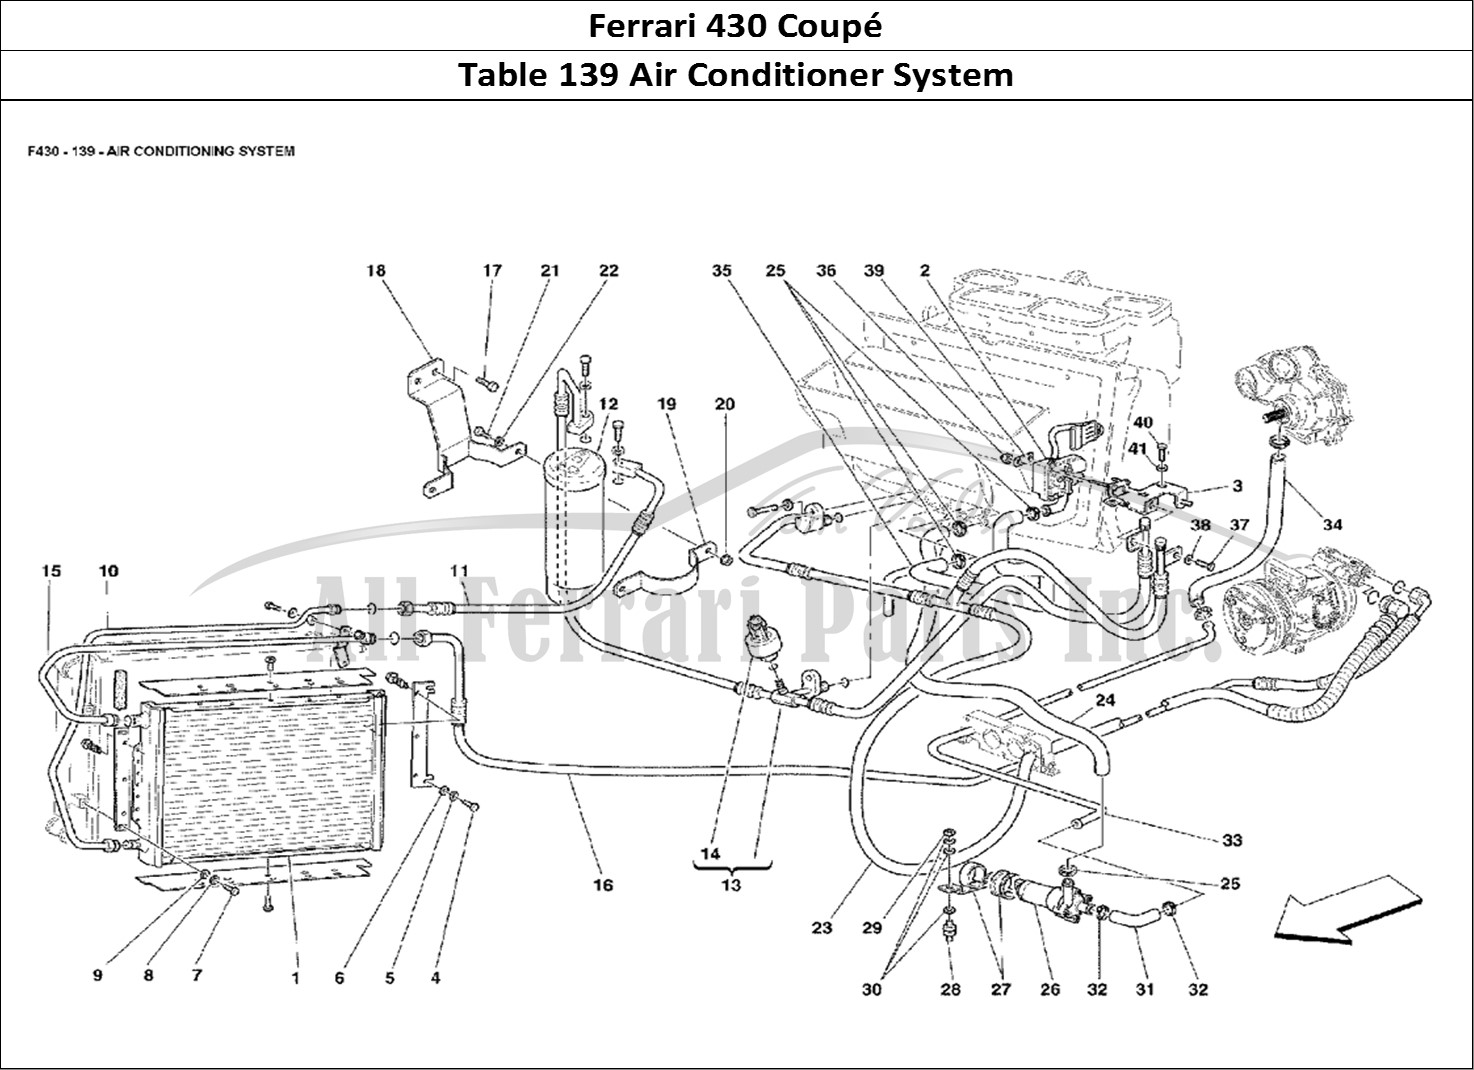 Ferrari Parts Ferrari 430 Coup Page 139 Air Conditioning System